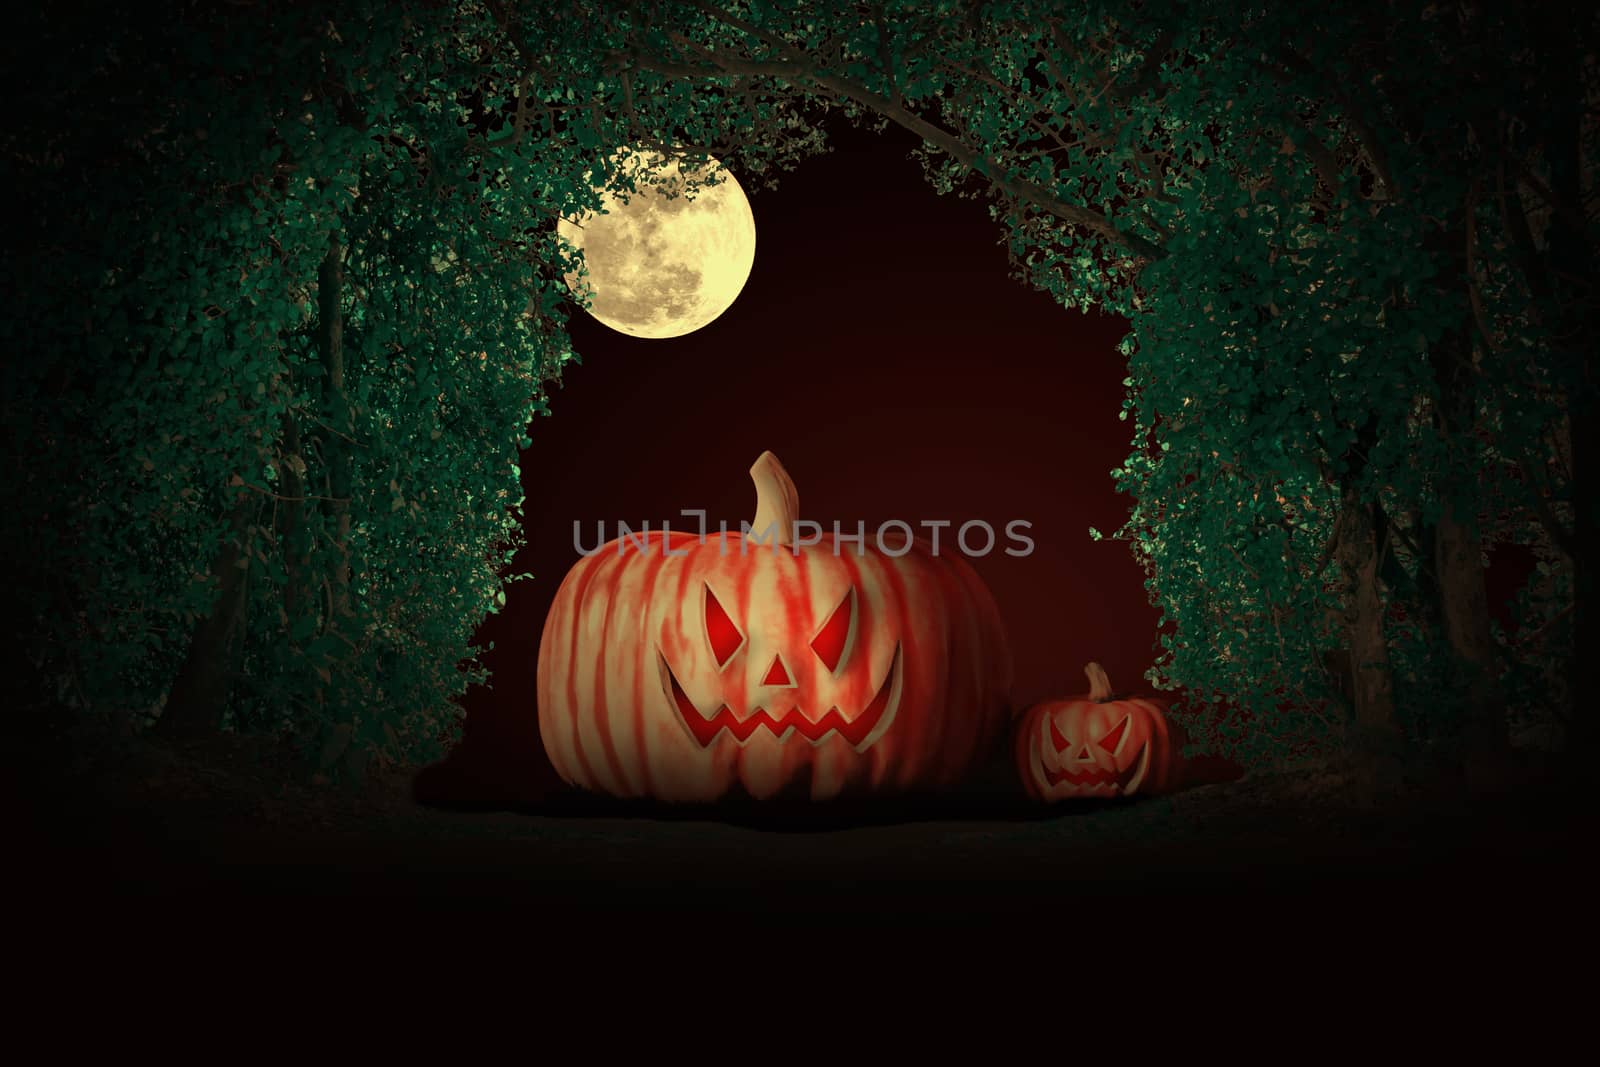 Halloween pumpkins at night under the full moon in the forest.